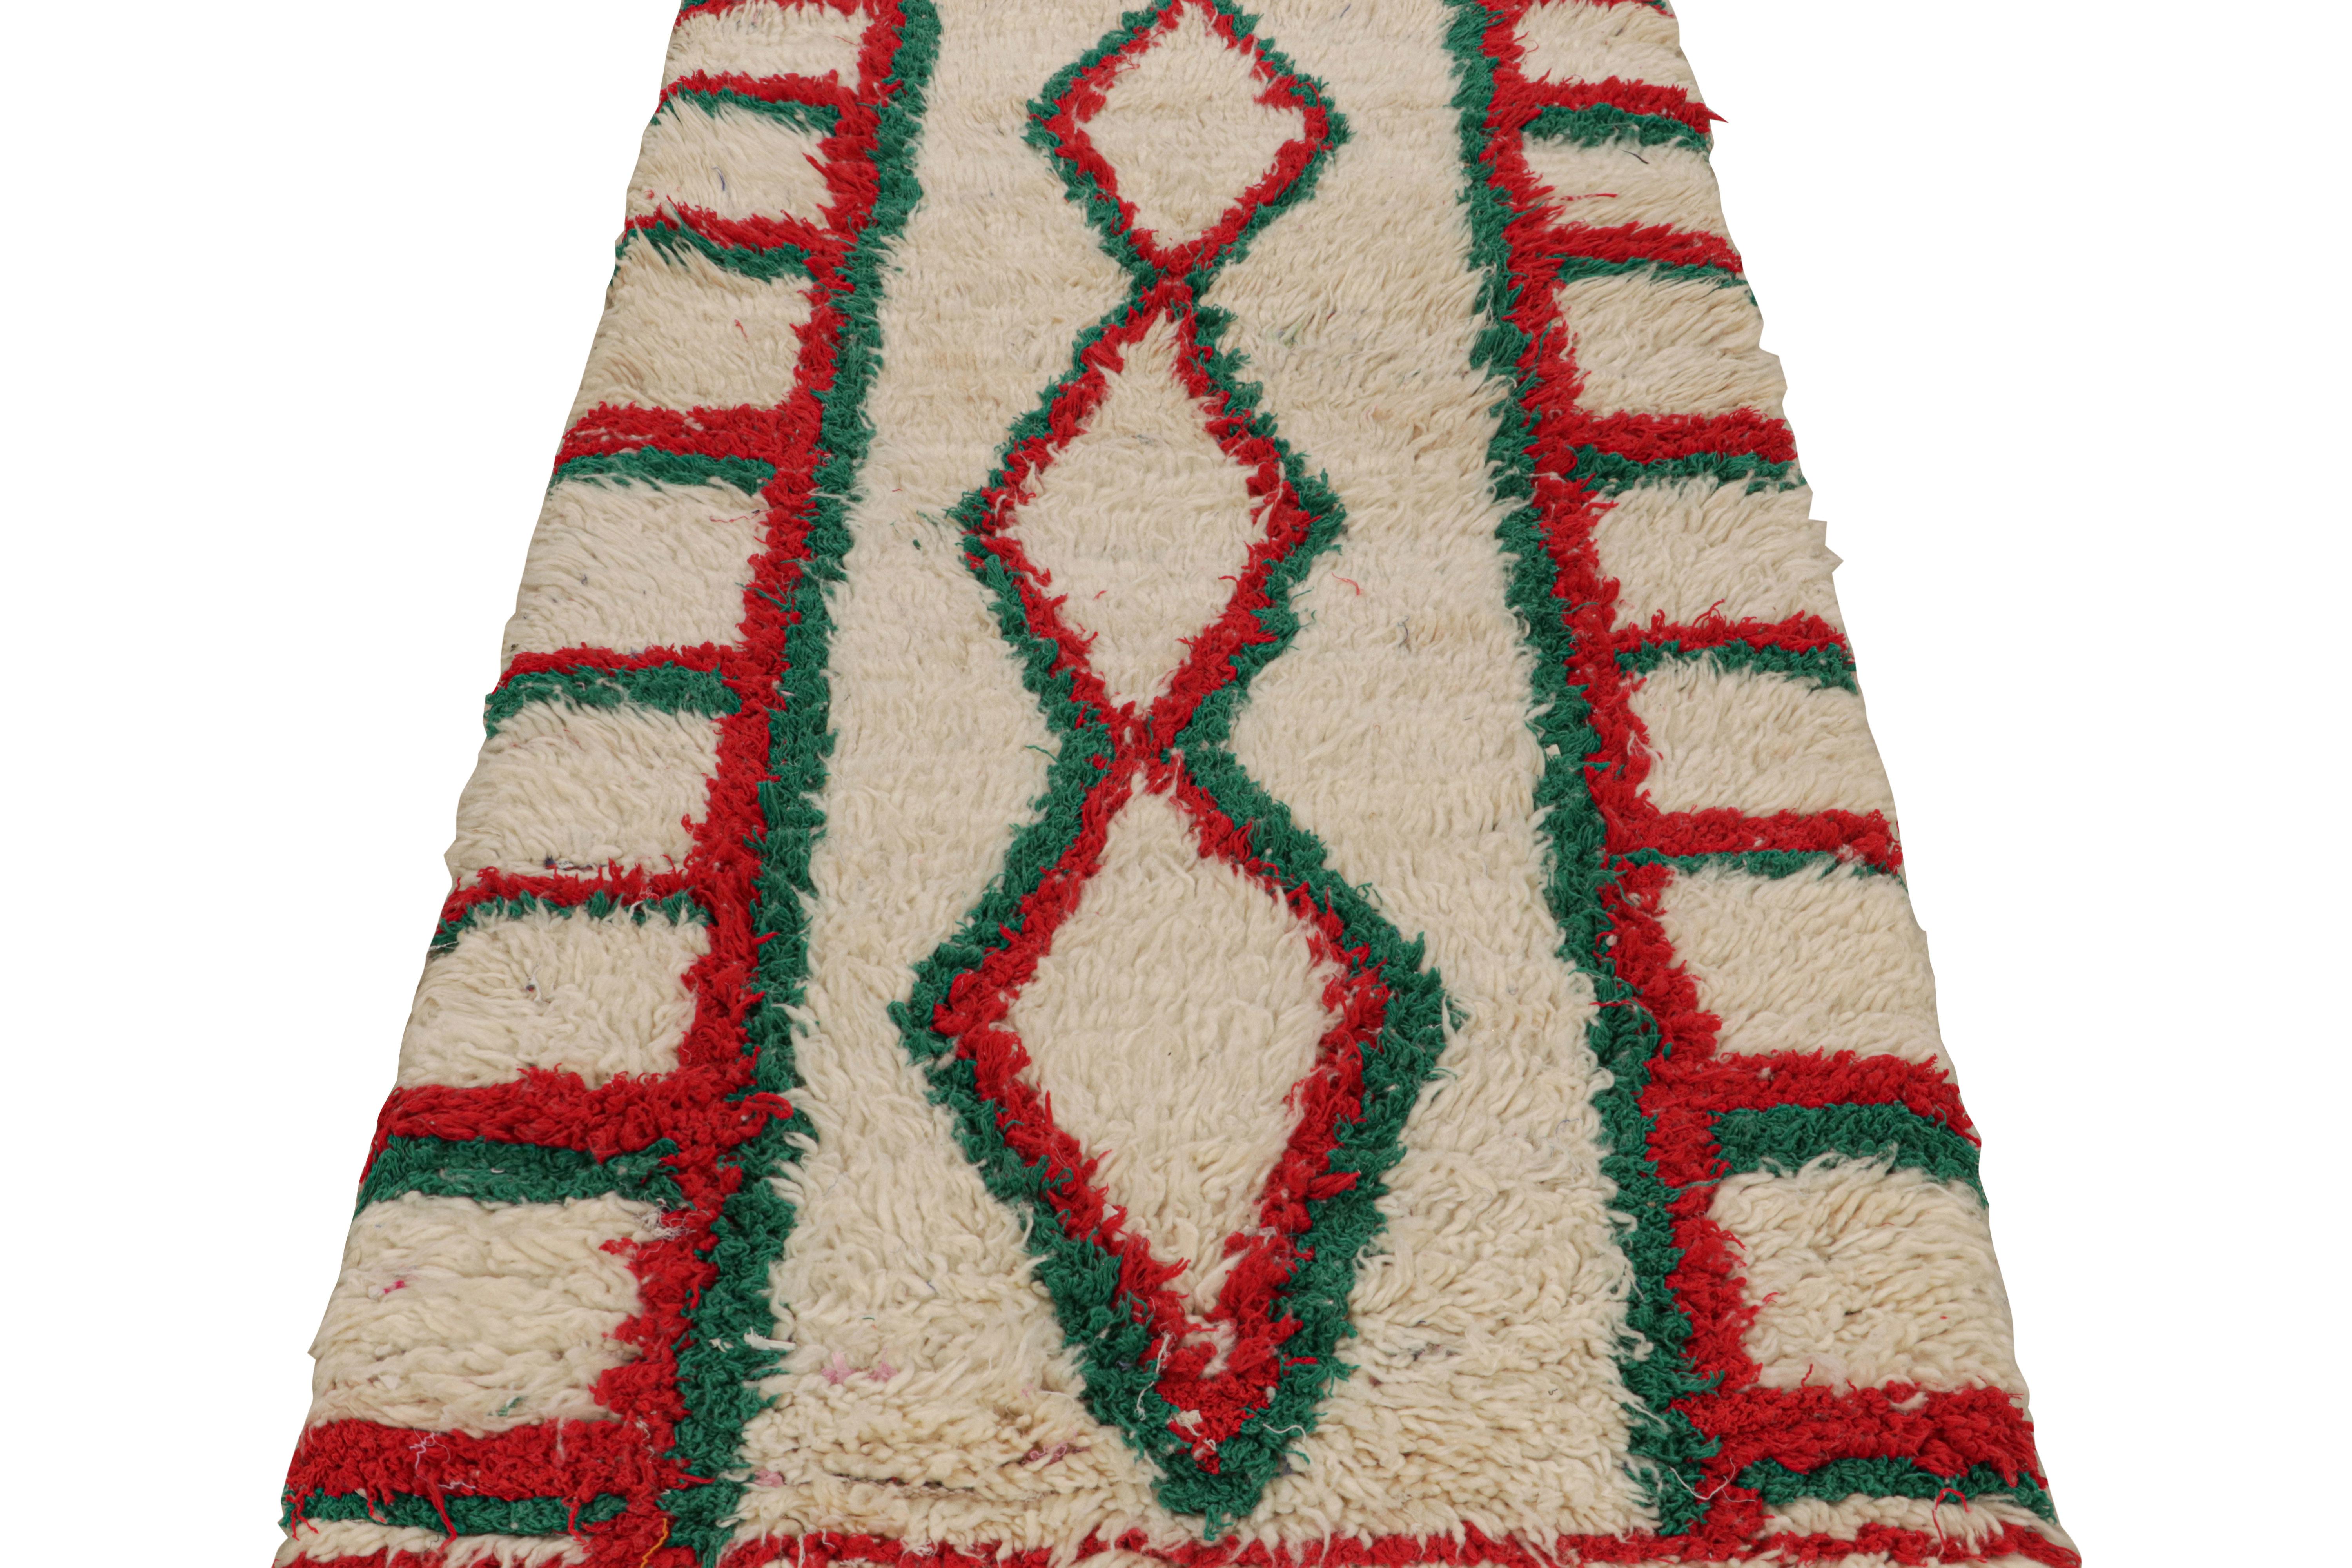 Hand-Knotted Vintage Moroccan Runner Rug with Red and Green Patterns, from Rug & Kilim  For Sale